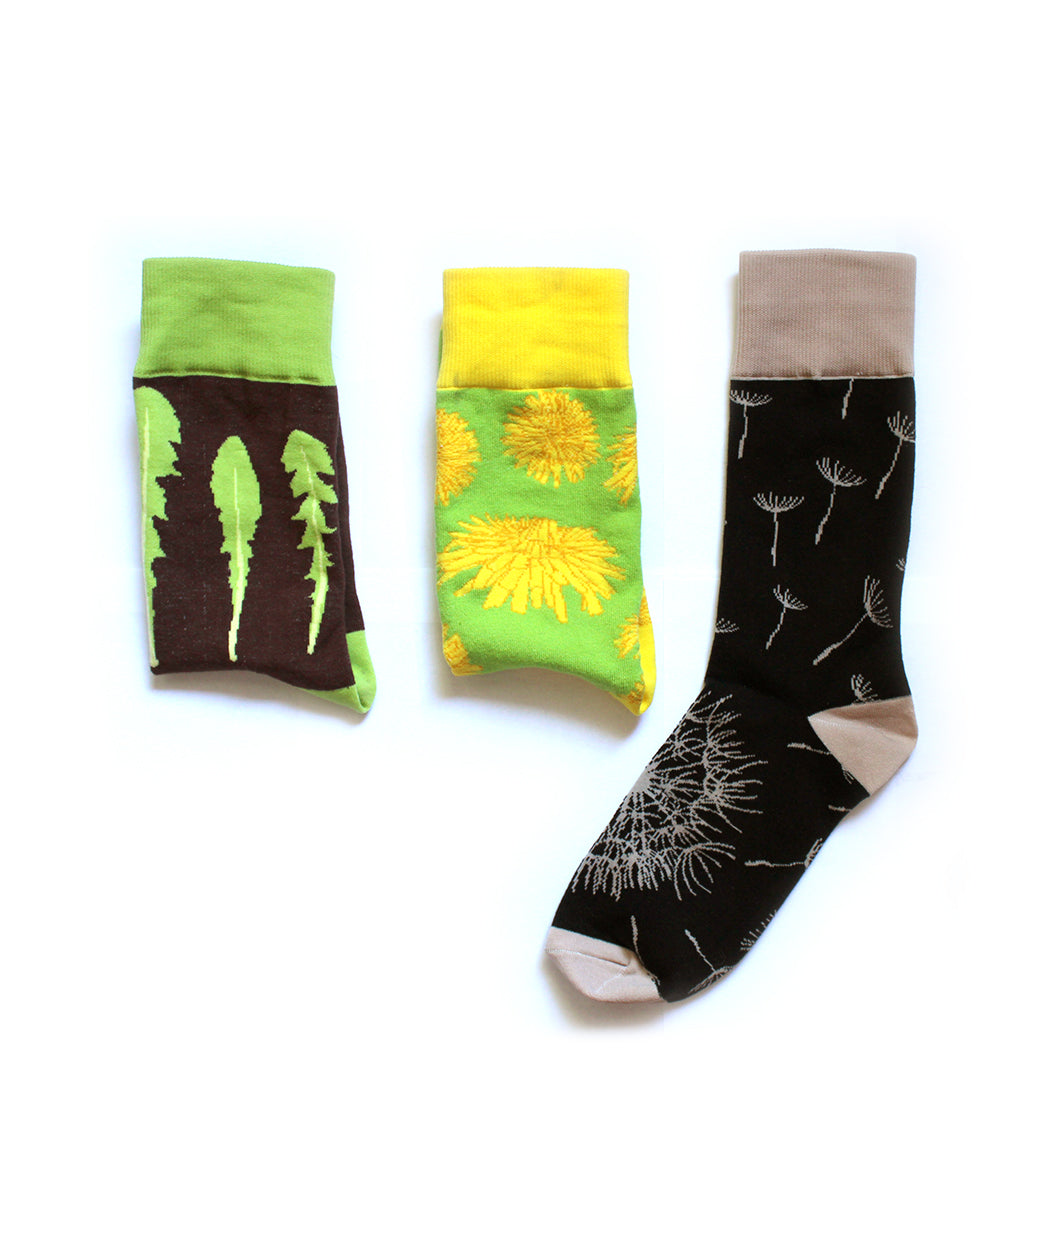 A set of three different socks. First: Brown sock folden in half with a green ankle and three leaves. Second: Light green sock folded in half with yellow ankle with a varying styles of yellow dandelions. Third: A black sock with tan ankle, heel, and toe dandelion multiple dandelion seeds floating away from dandelion - from This Star Won’t Go Out